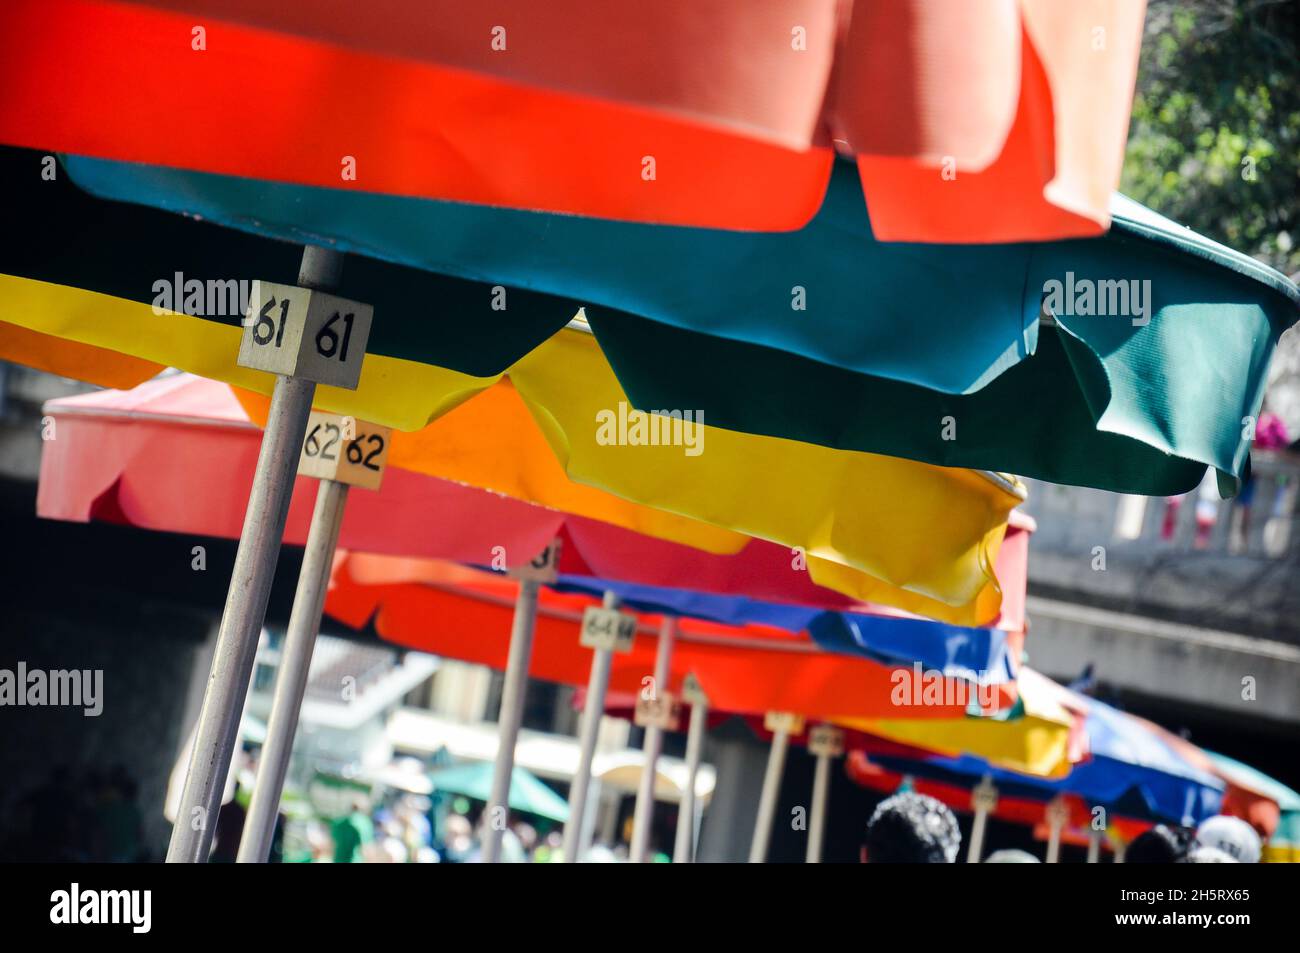 Set of multi-colored umbrellas with table numbers at a restaurant in the Riverwalk area in San Antonio, Texas Stock Photo